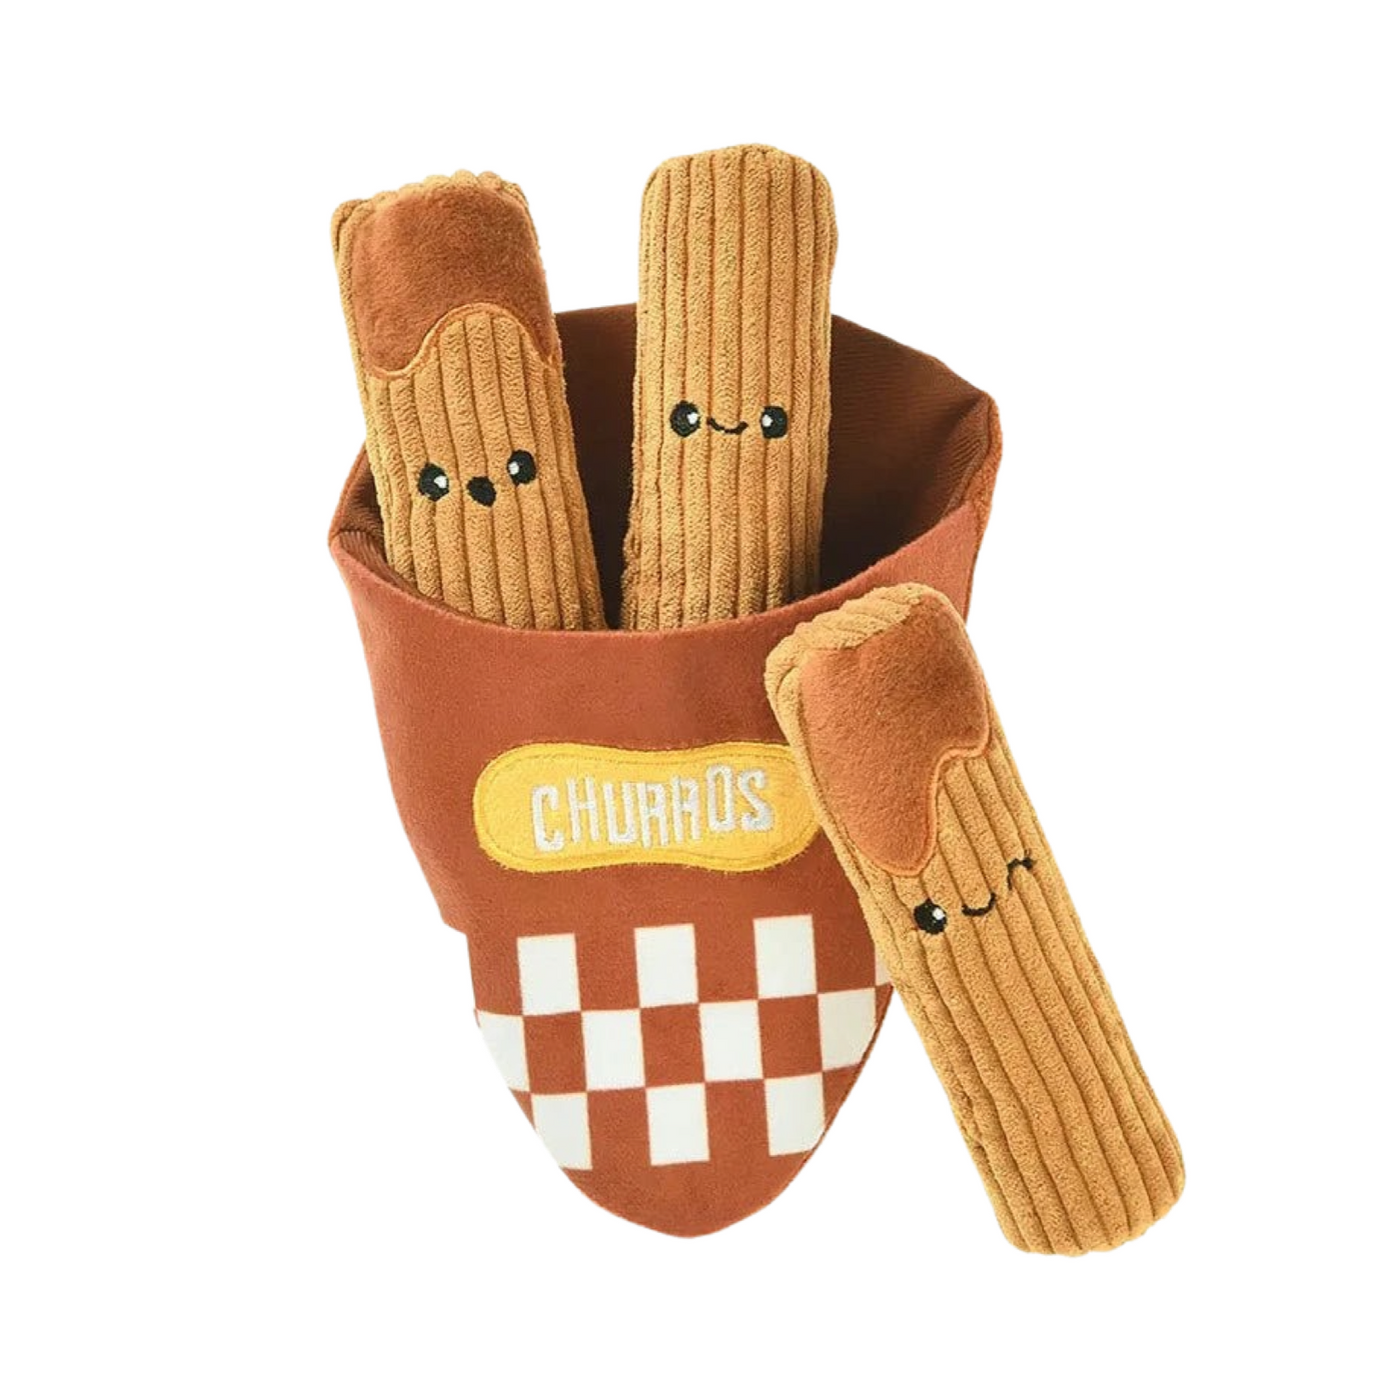 plush dog toy in the shape of a bag of churros with three pieces of churros featuring smiling faces on the churros.